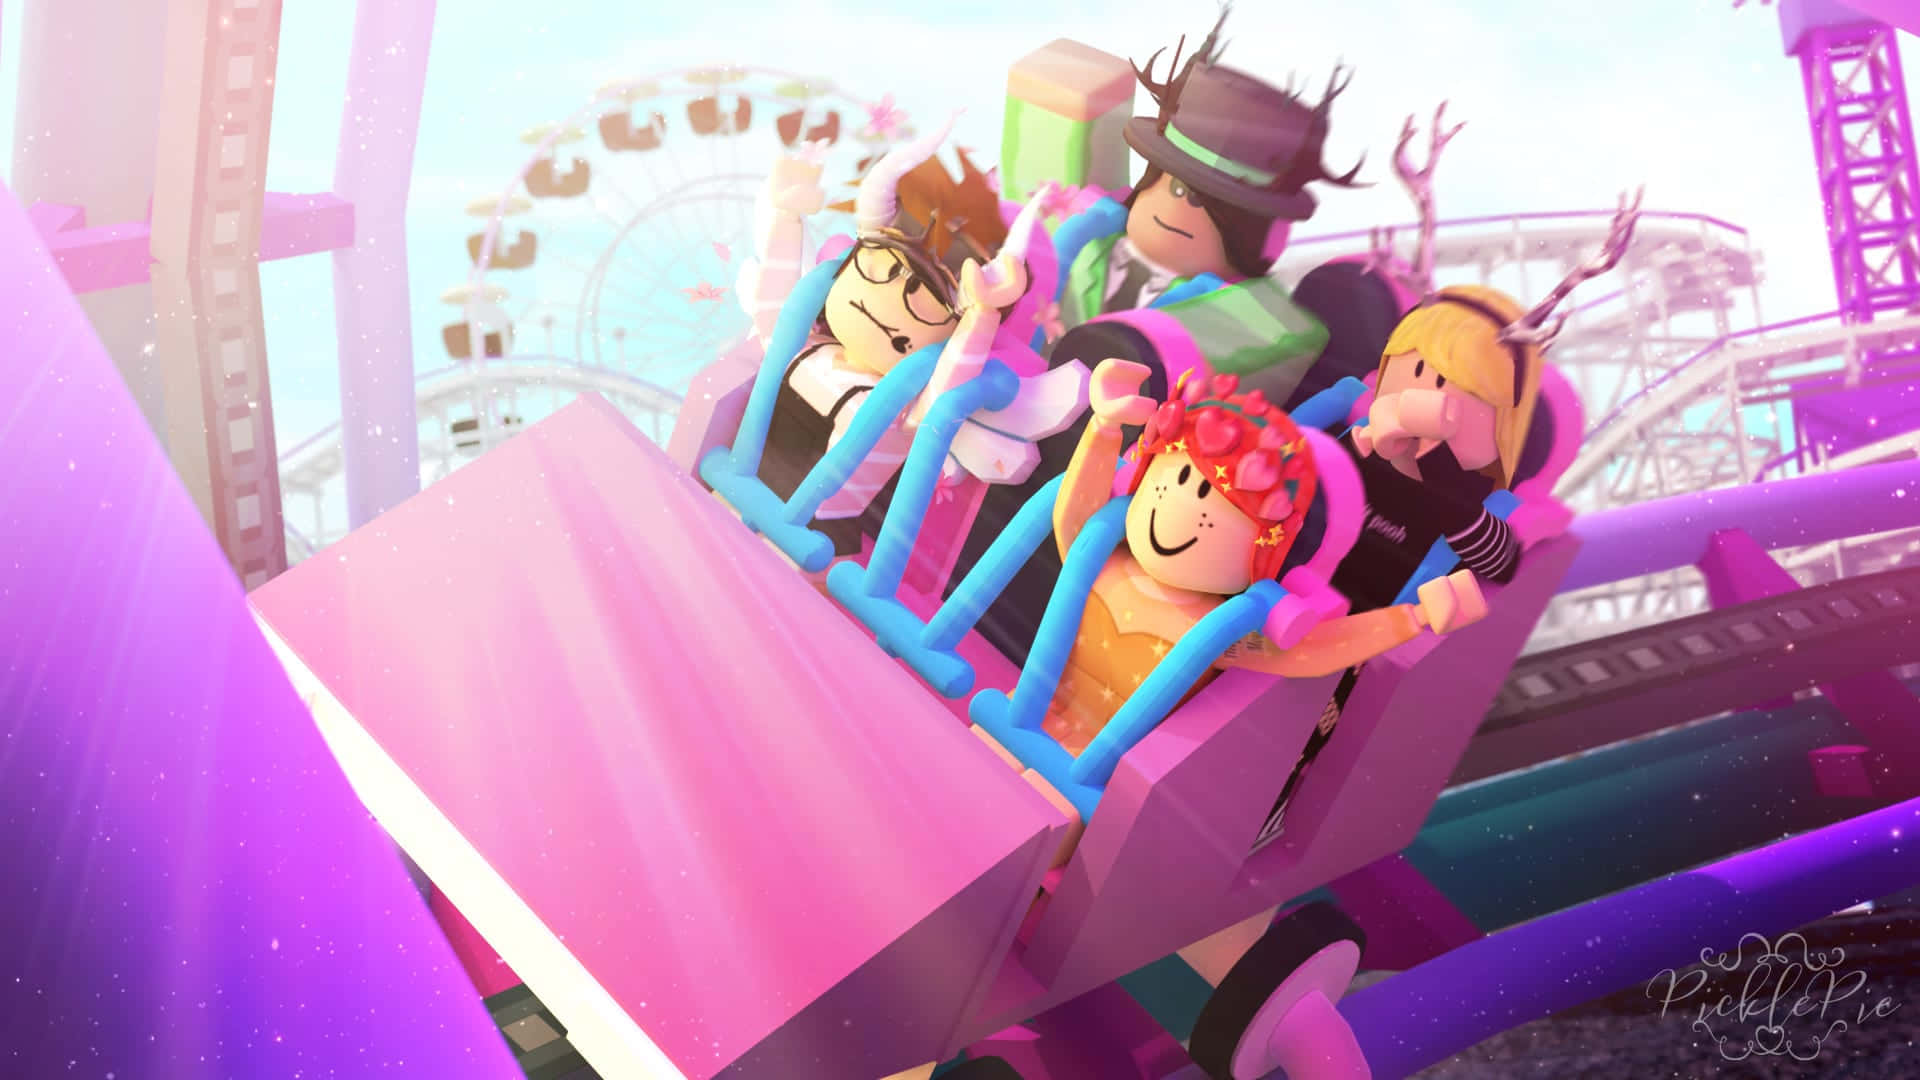 A Group Of People Riding A Roller Coaster